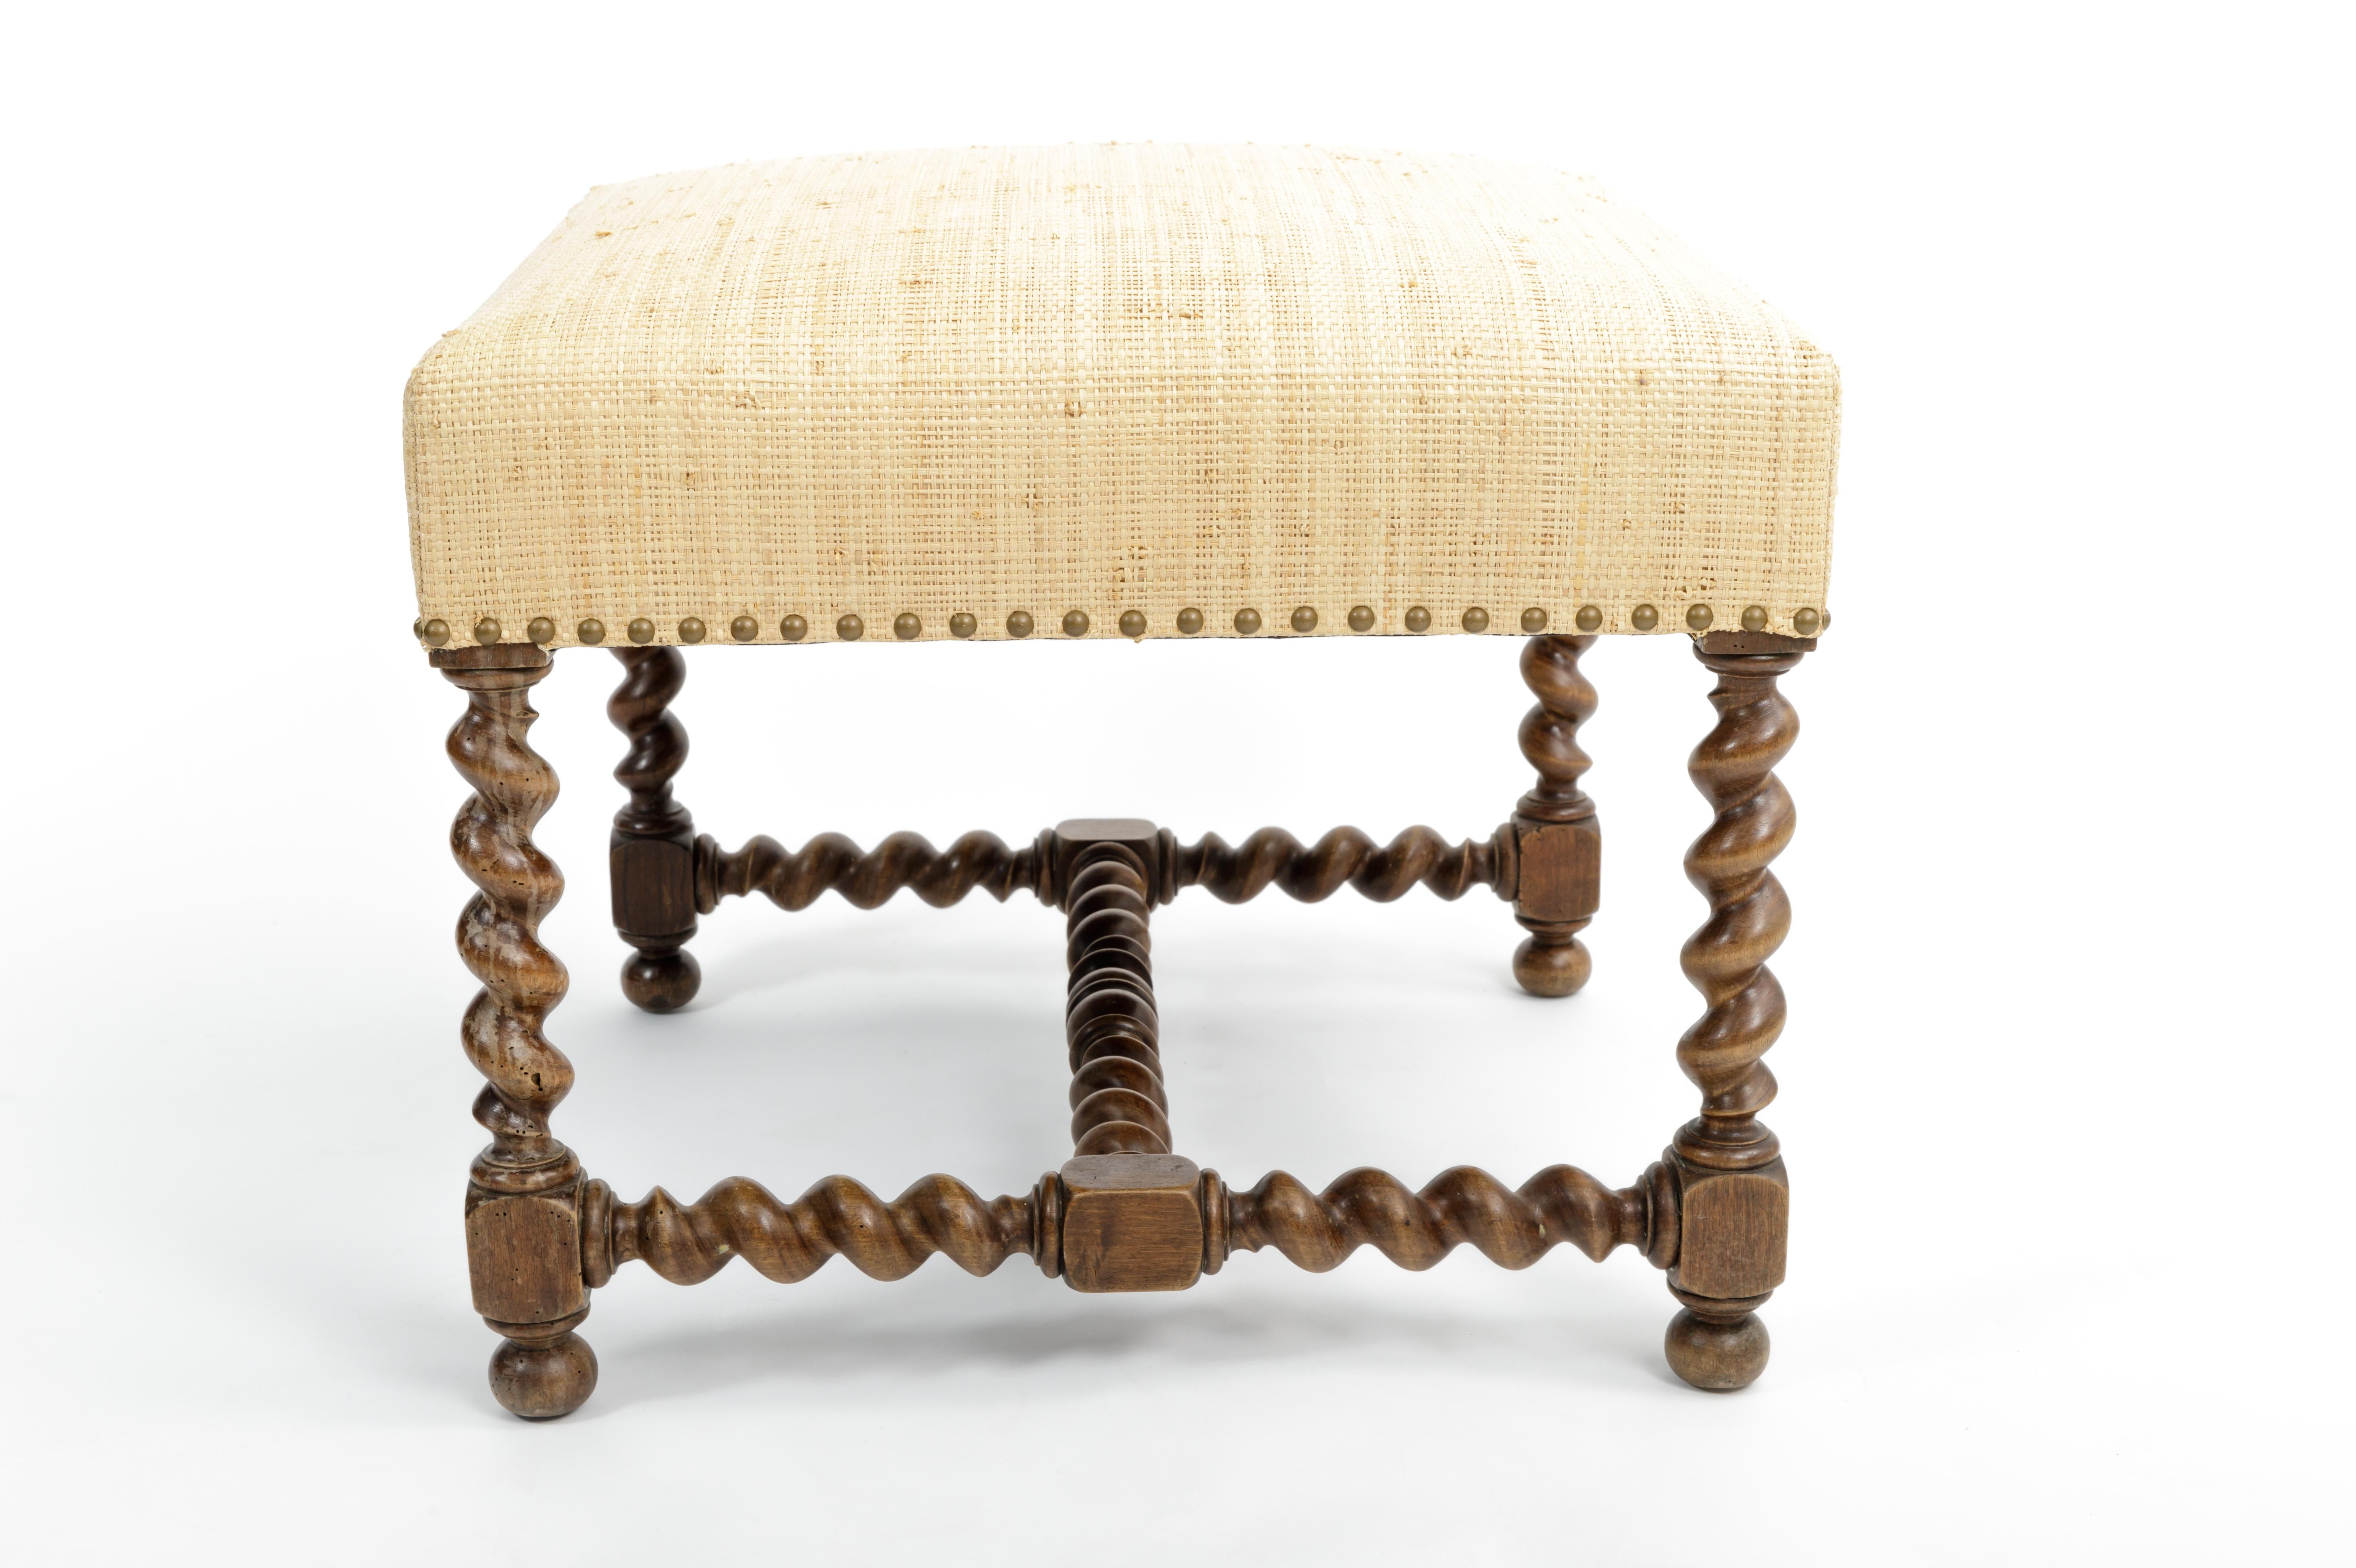 Wood Antique Barley Twist Stool with Cream Linen Upholstery, Europe, 19th Century For Sale